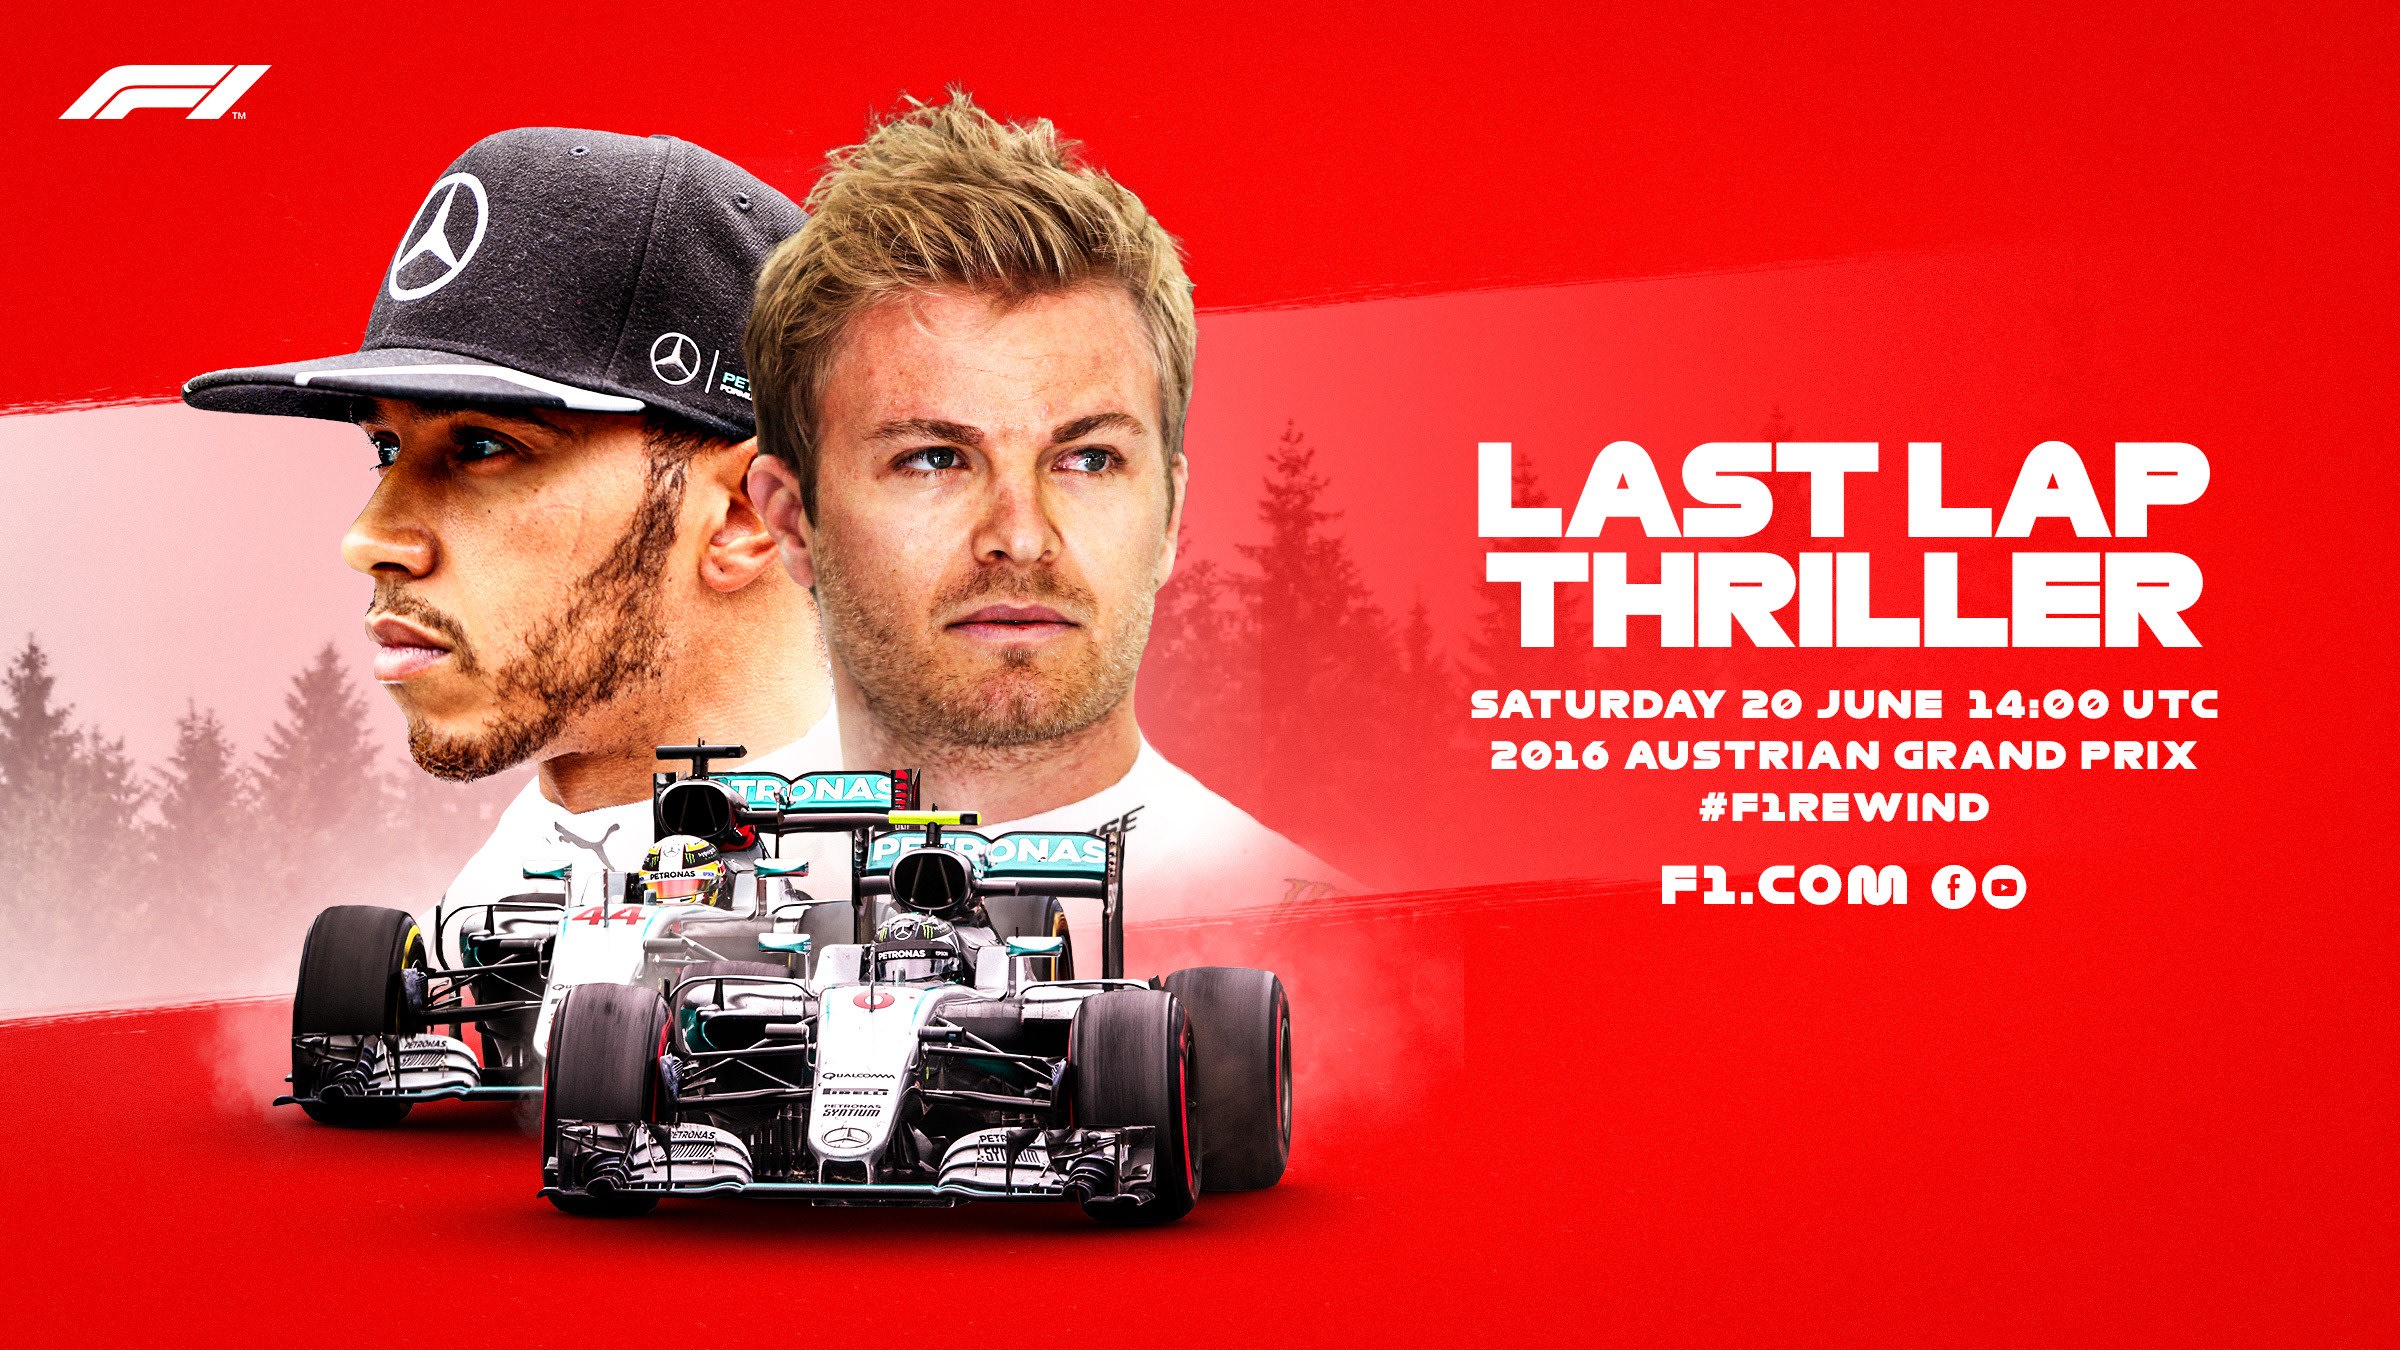 WATCH Relive the stunning Hamilton/Rosberg battle at the 2016 Austrian Grand Prix in full Formula 1®